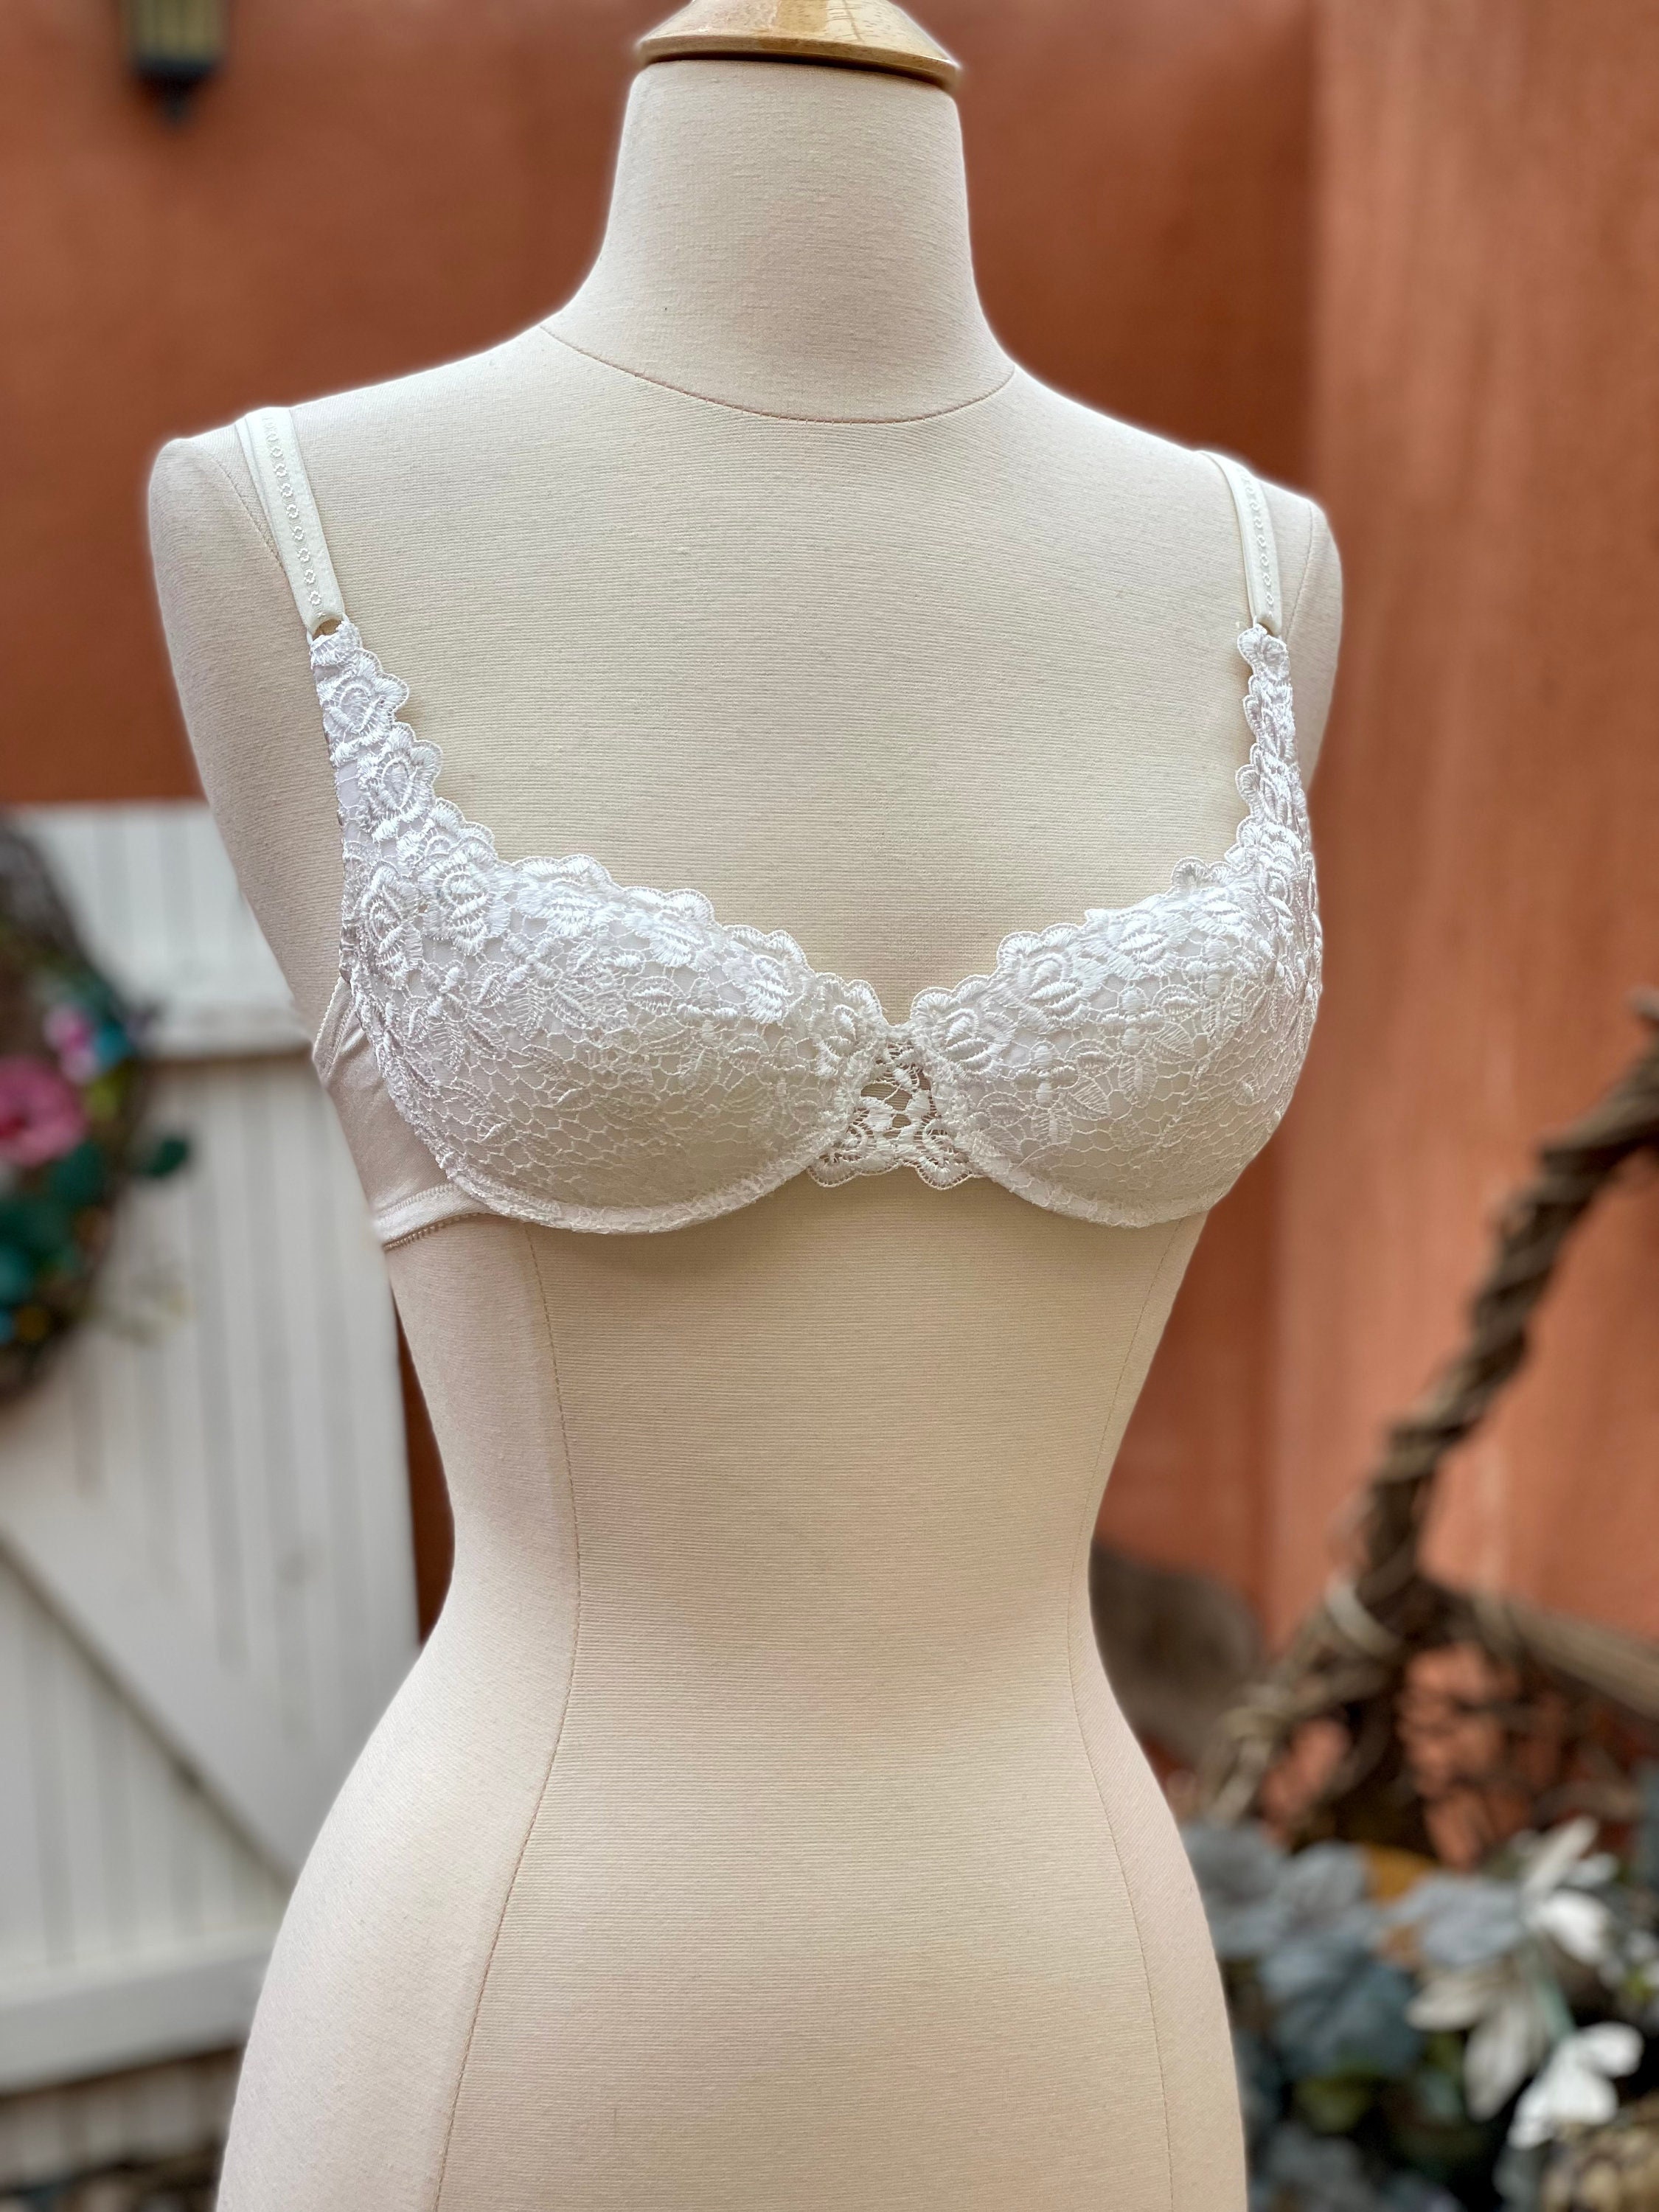 Vintage Victoria's Secret White Lace Miracle Bra NEW OLD STOCK Size 32A